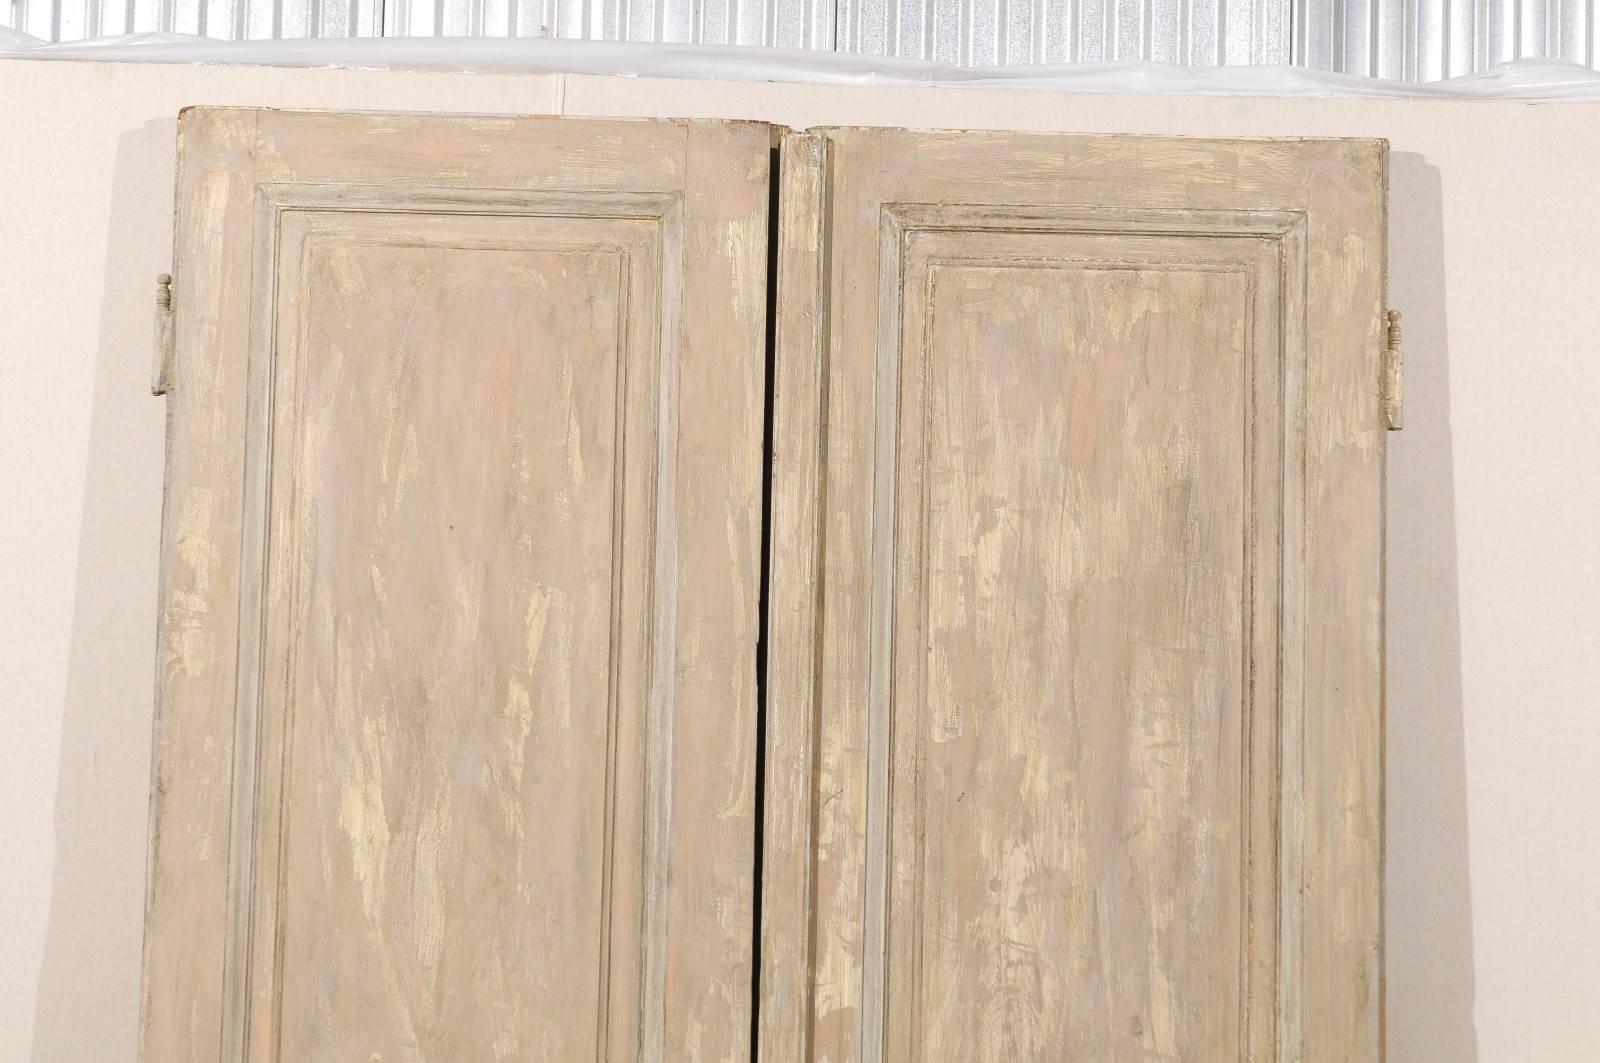 19th Century French Pair of 19th C. Three-Panel Painted Wood Doors, Approximately 8.75' Tall